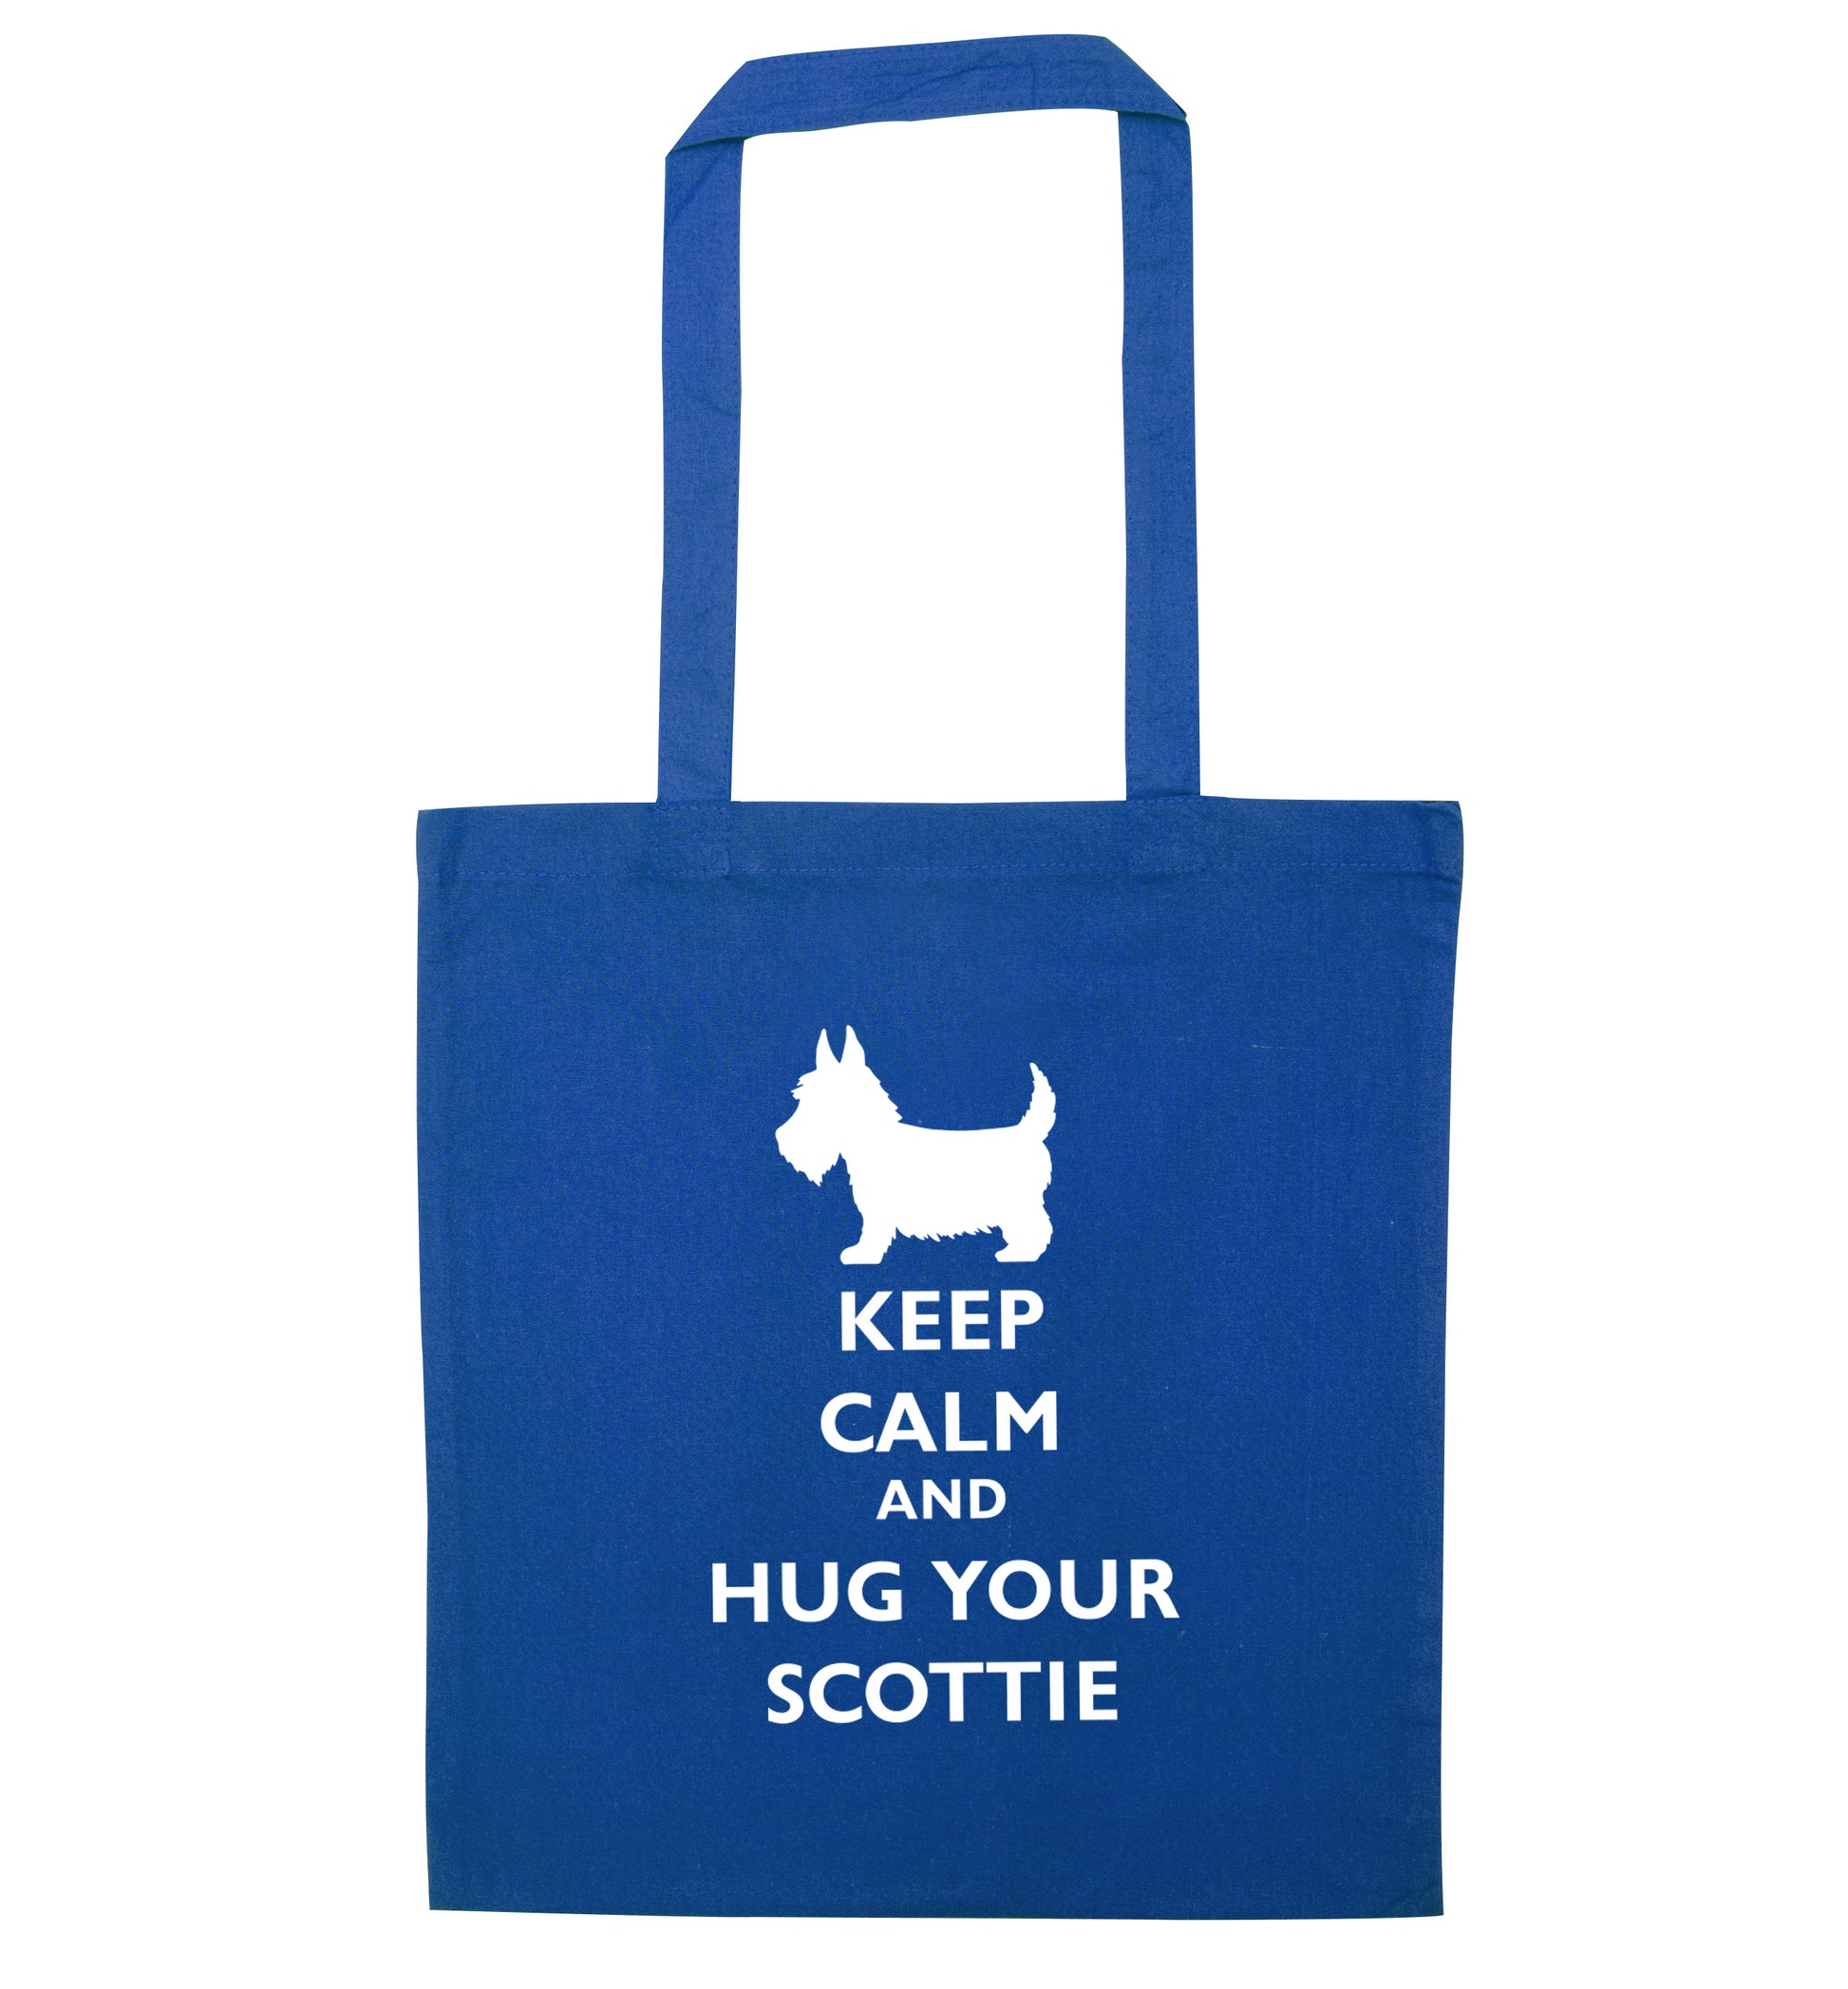 Keep calm and hug your scottie blue tote bag